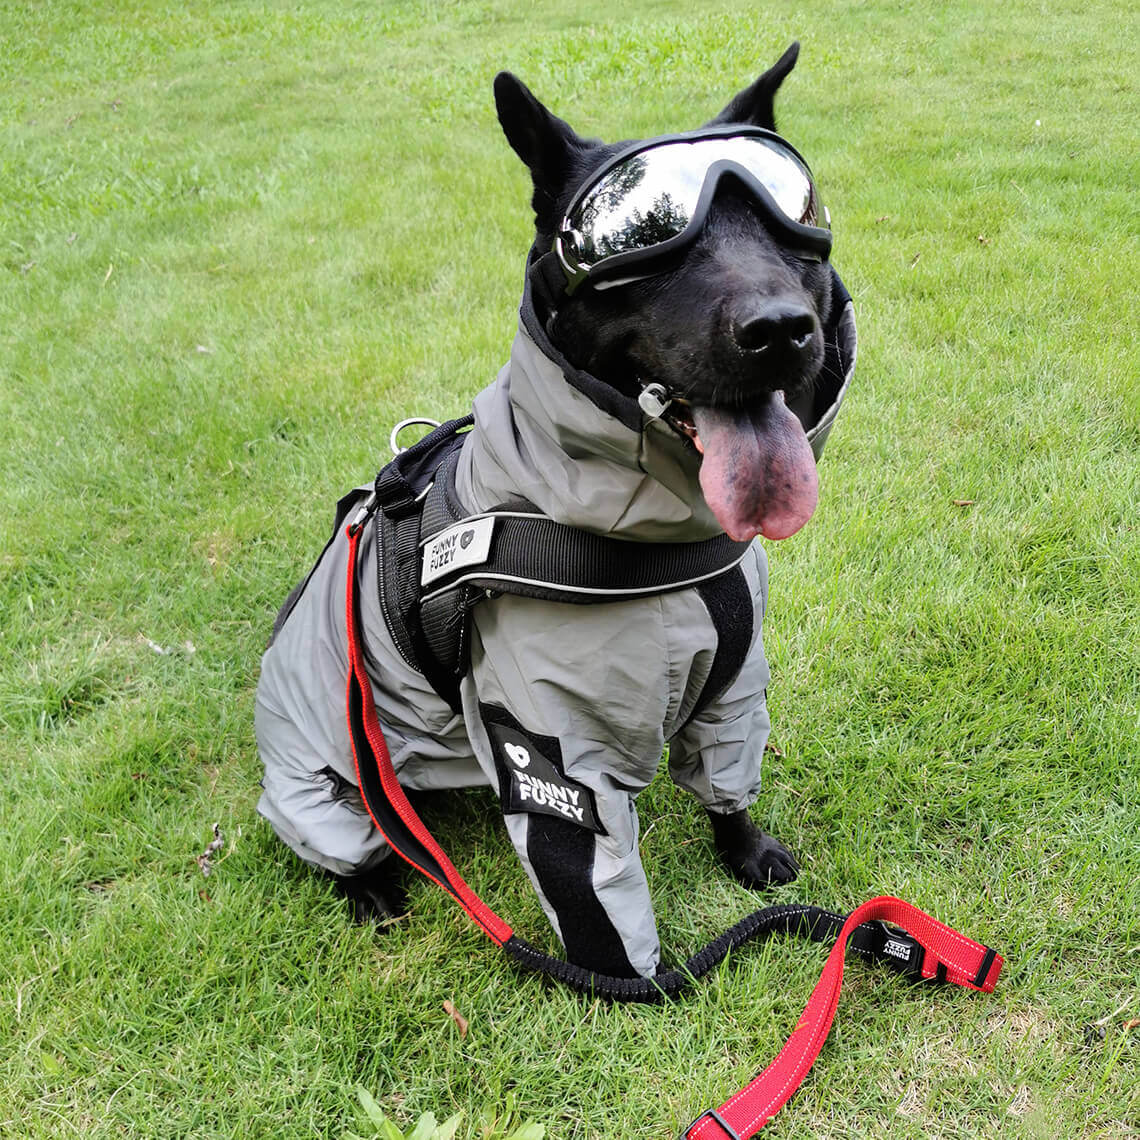 Reflective All-weather Waterproof Cool Dog Accessories Rain Coat -  FunnyFuzzy